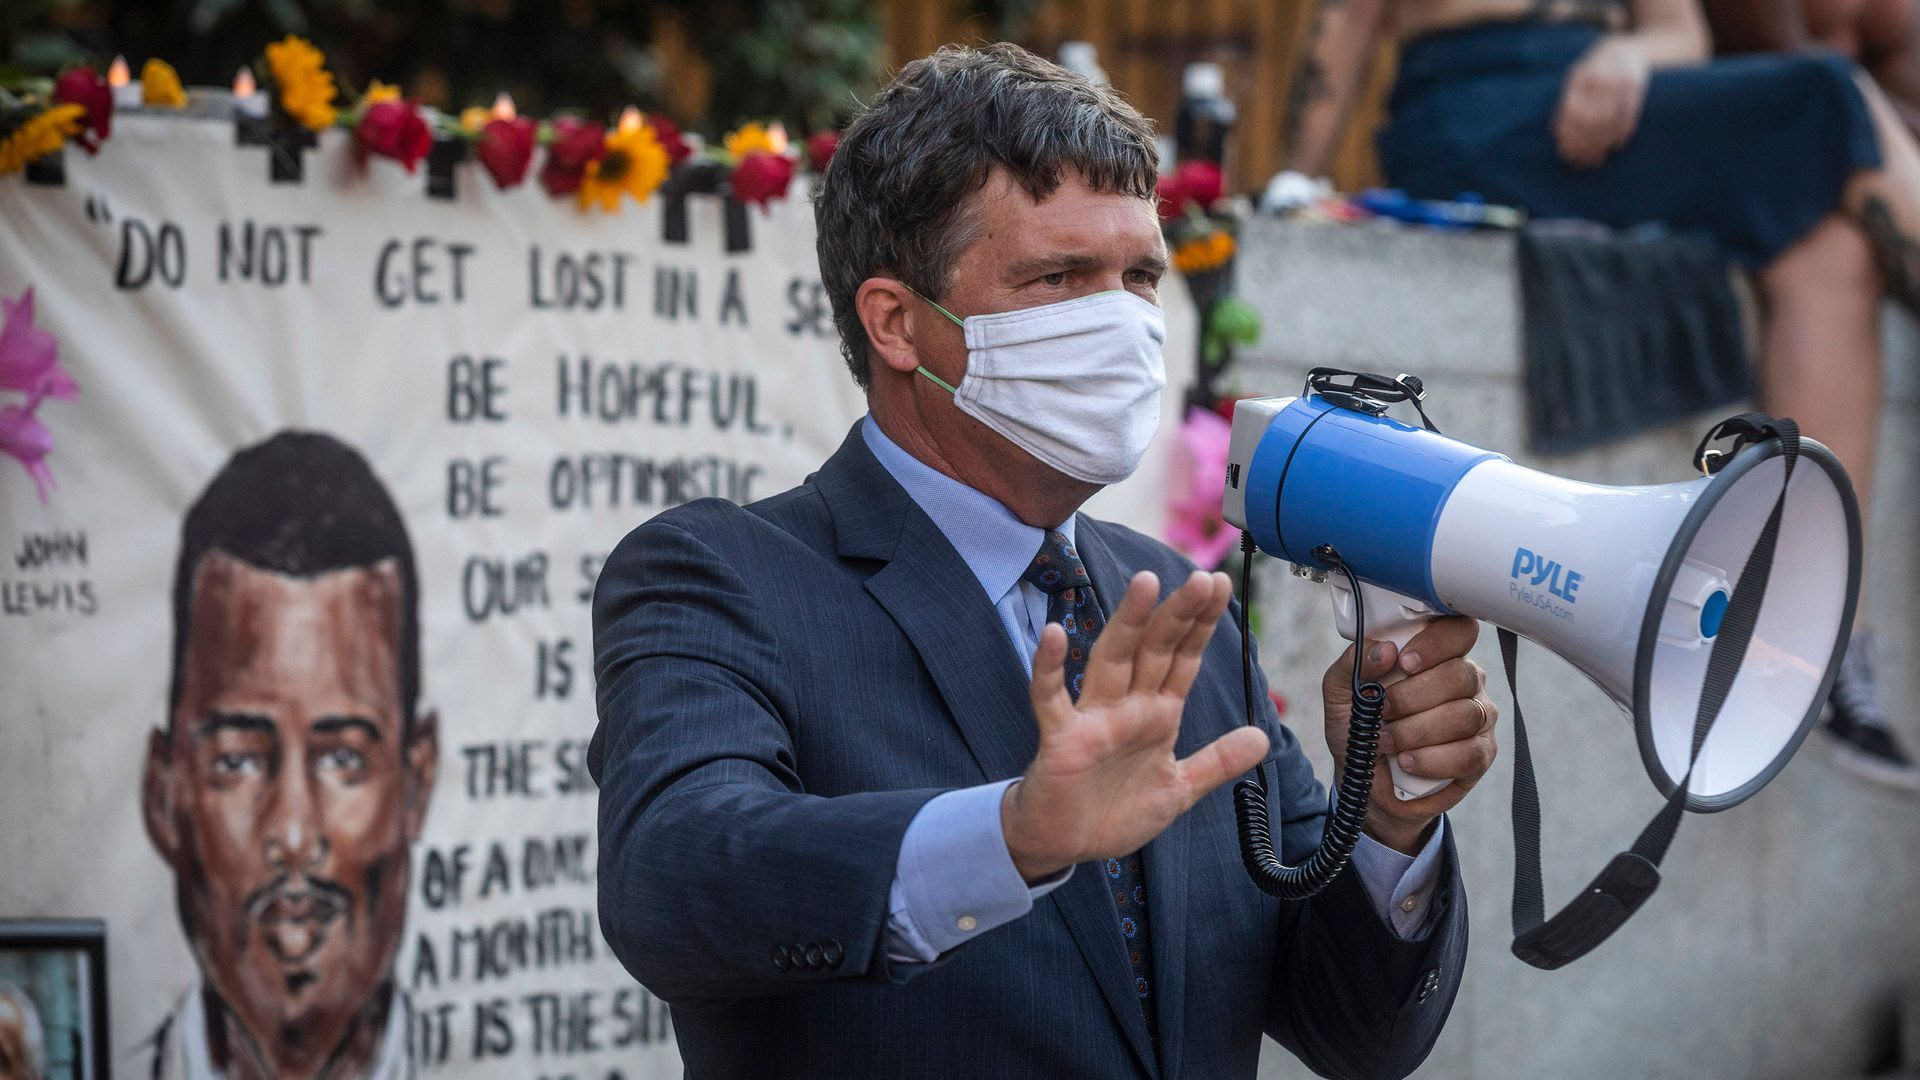 State Rep. Mike Stewart holding a megaphone while wearing a mask.